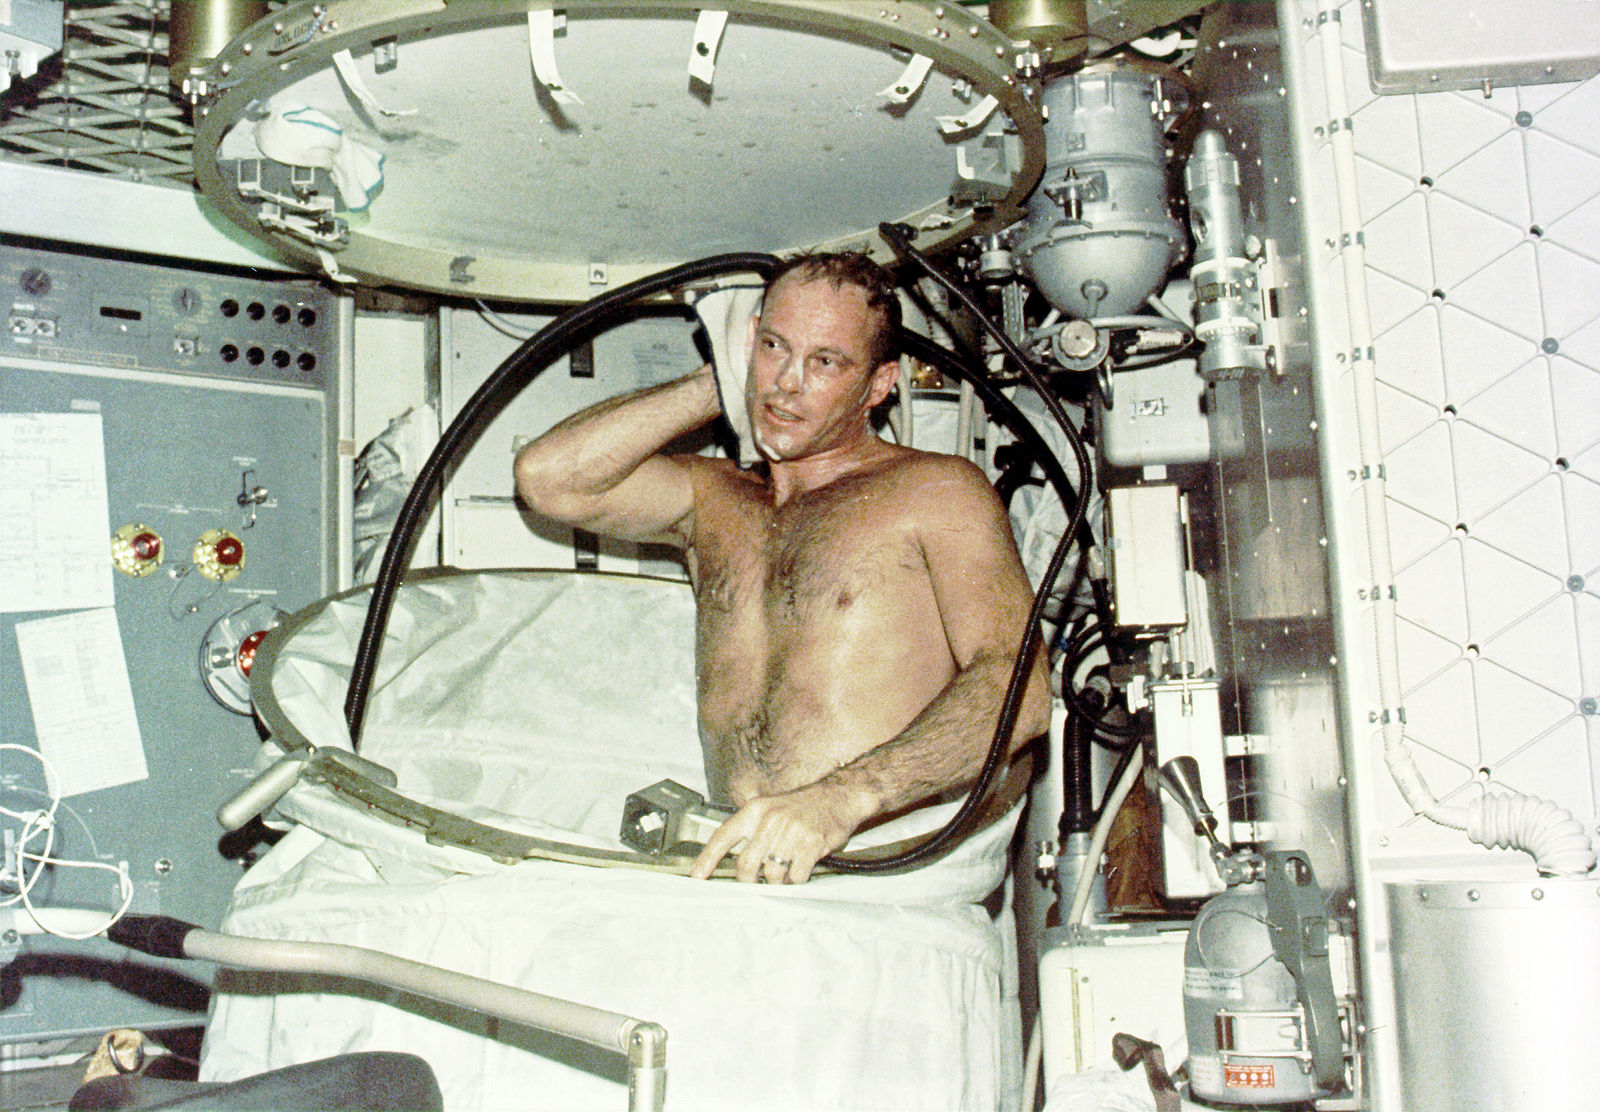 Photo: Astronaut taking a hot bath in the crew quarters of the Orbital Workshop (OWS) of the Skylab space station cluster in Earth orbit